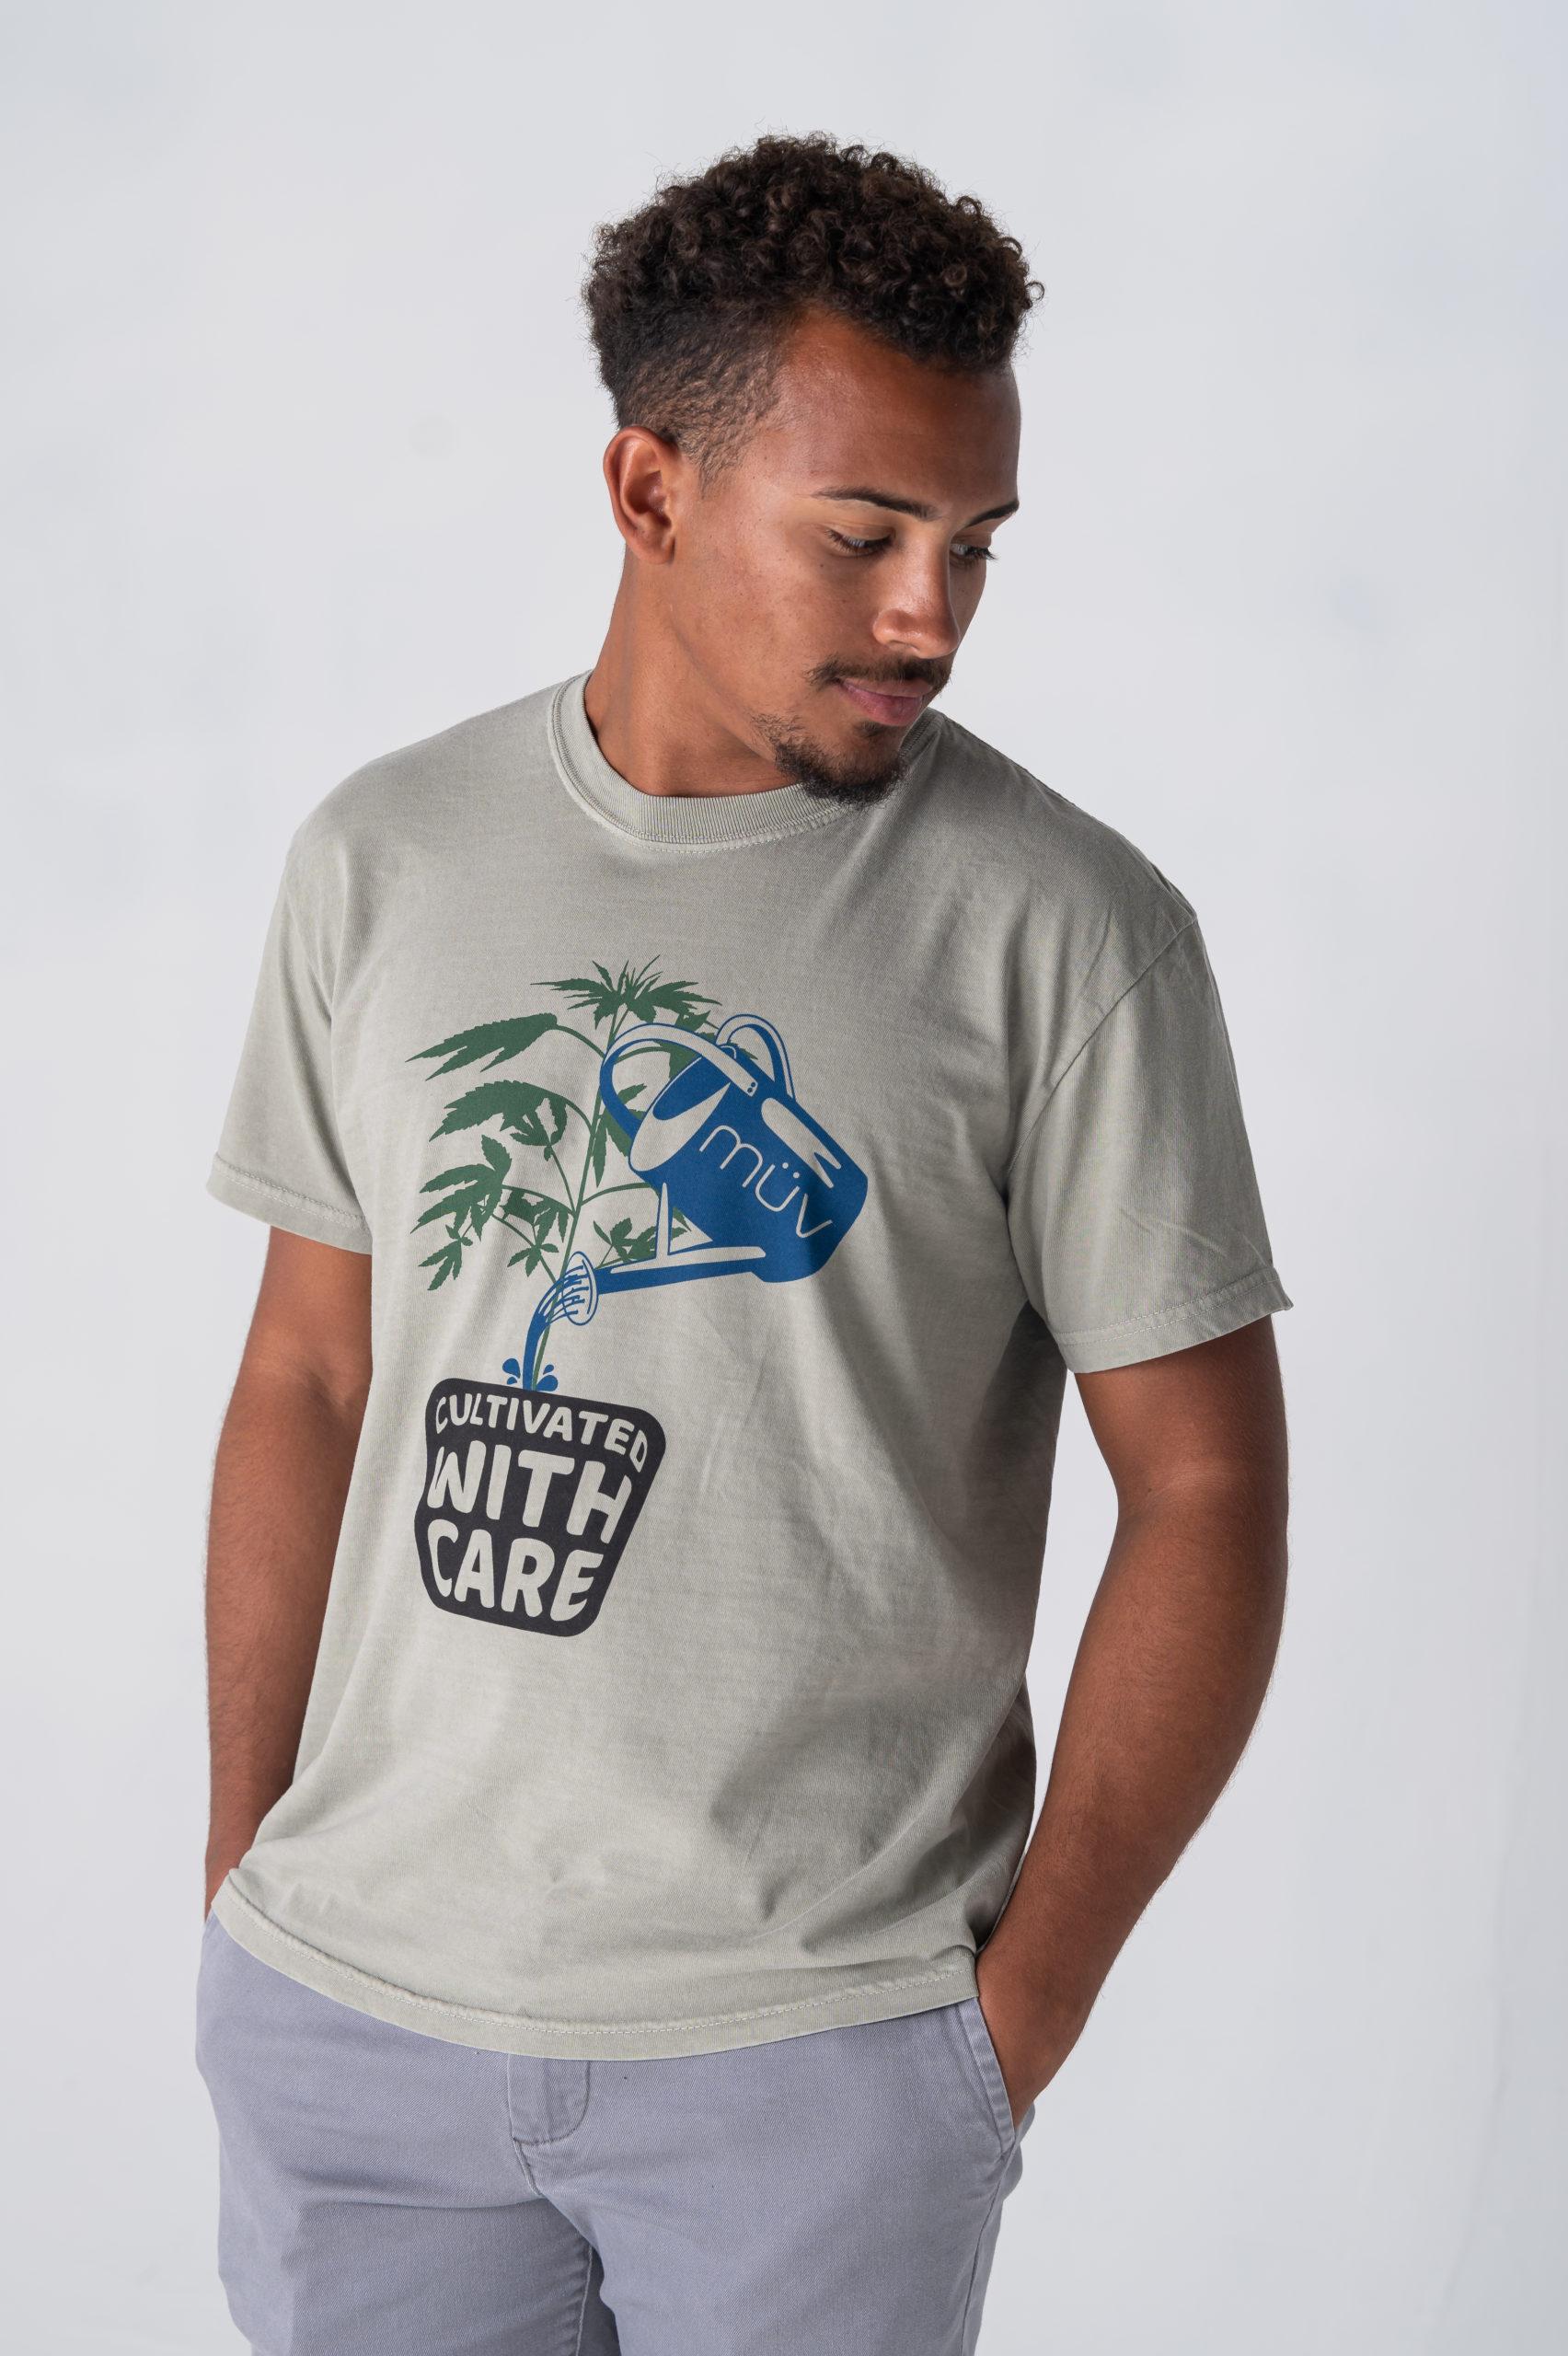 Cultivated with Care Cannabis Tee